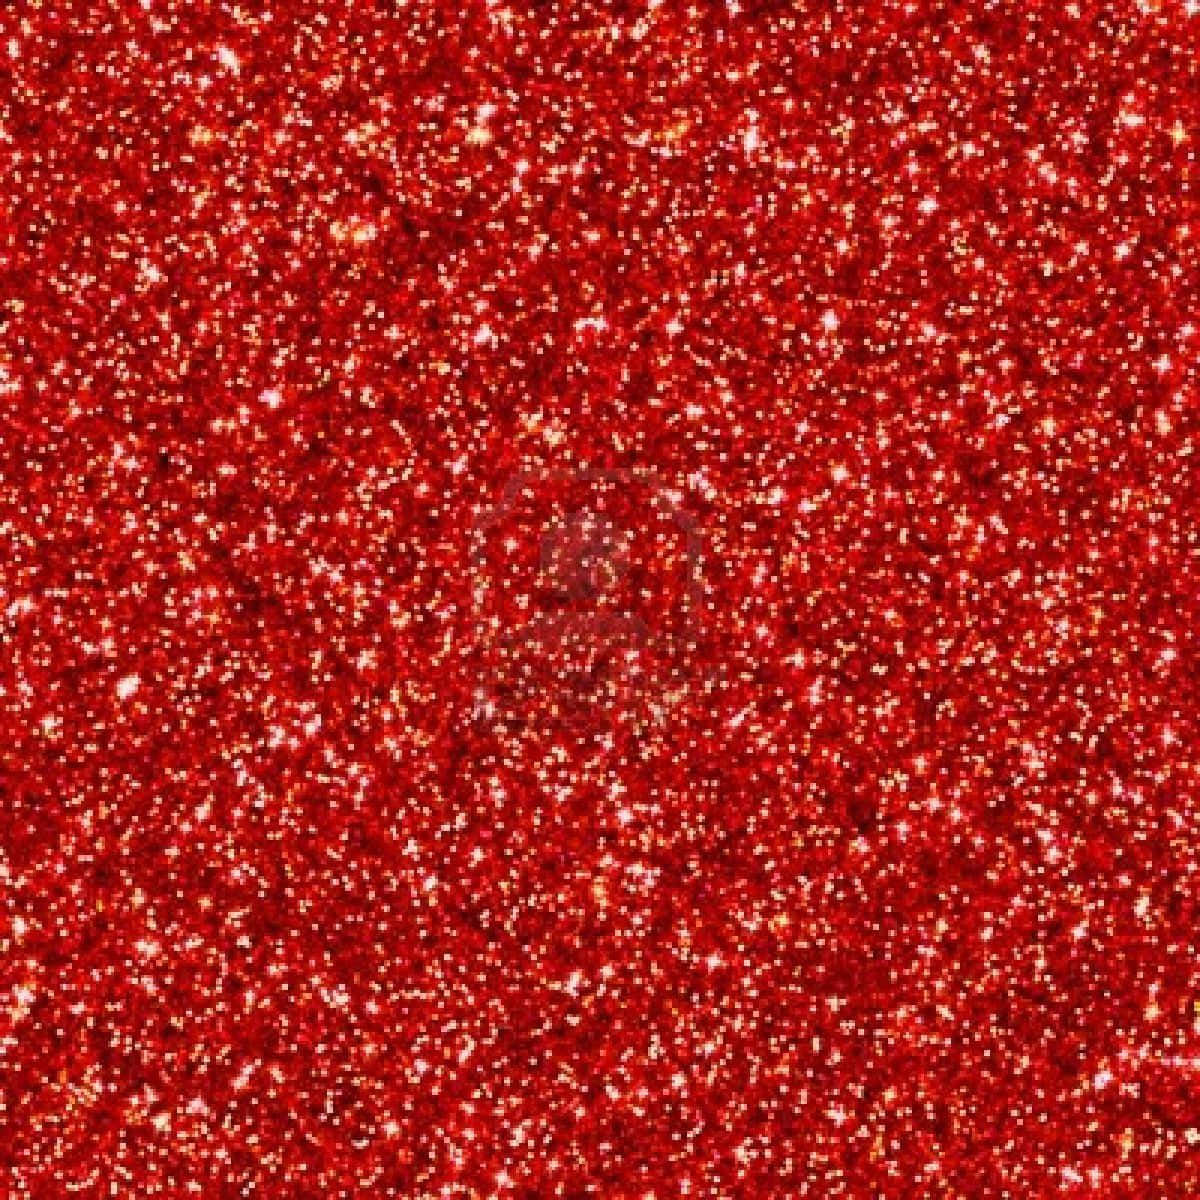 Glittery Red Joy and Brilliance